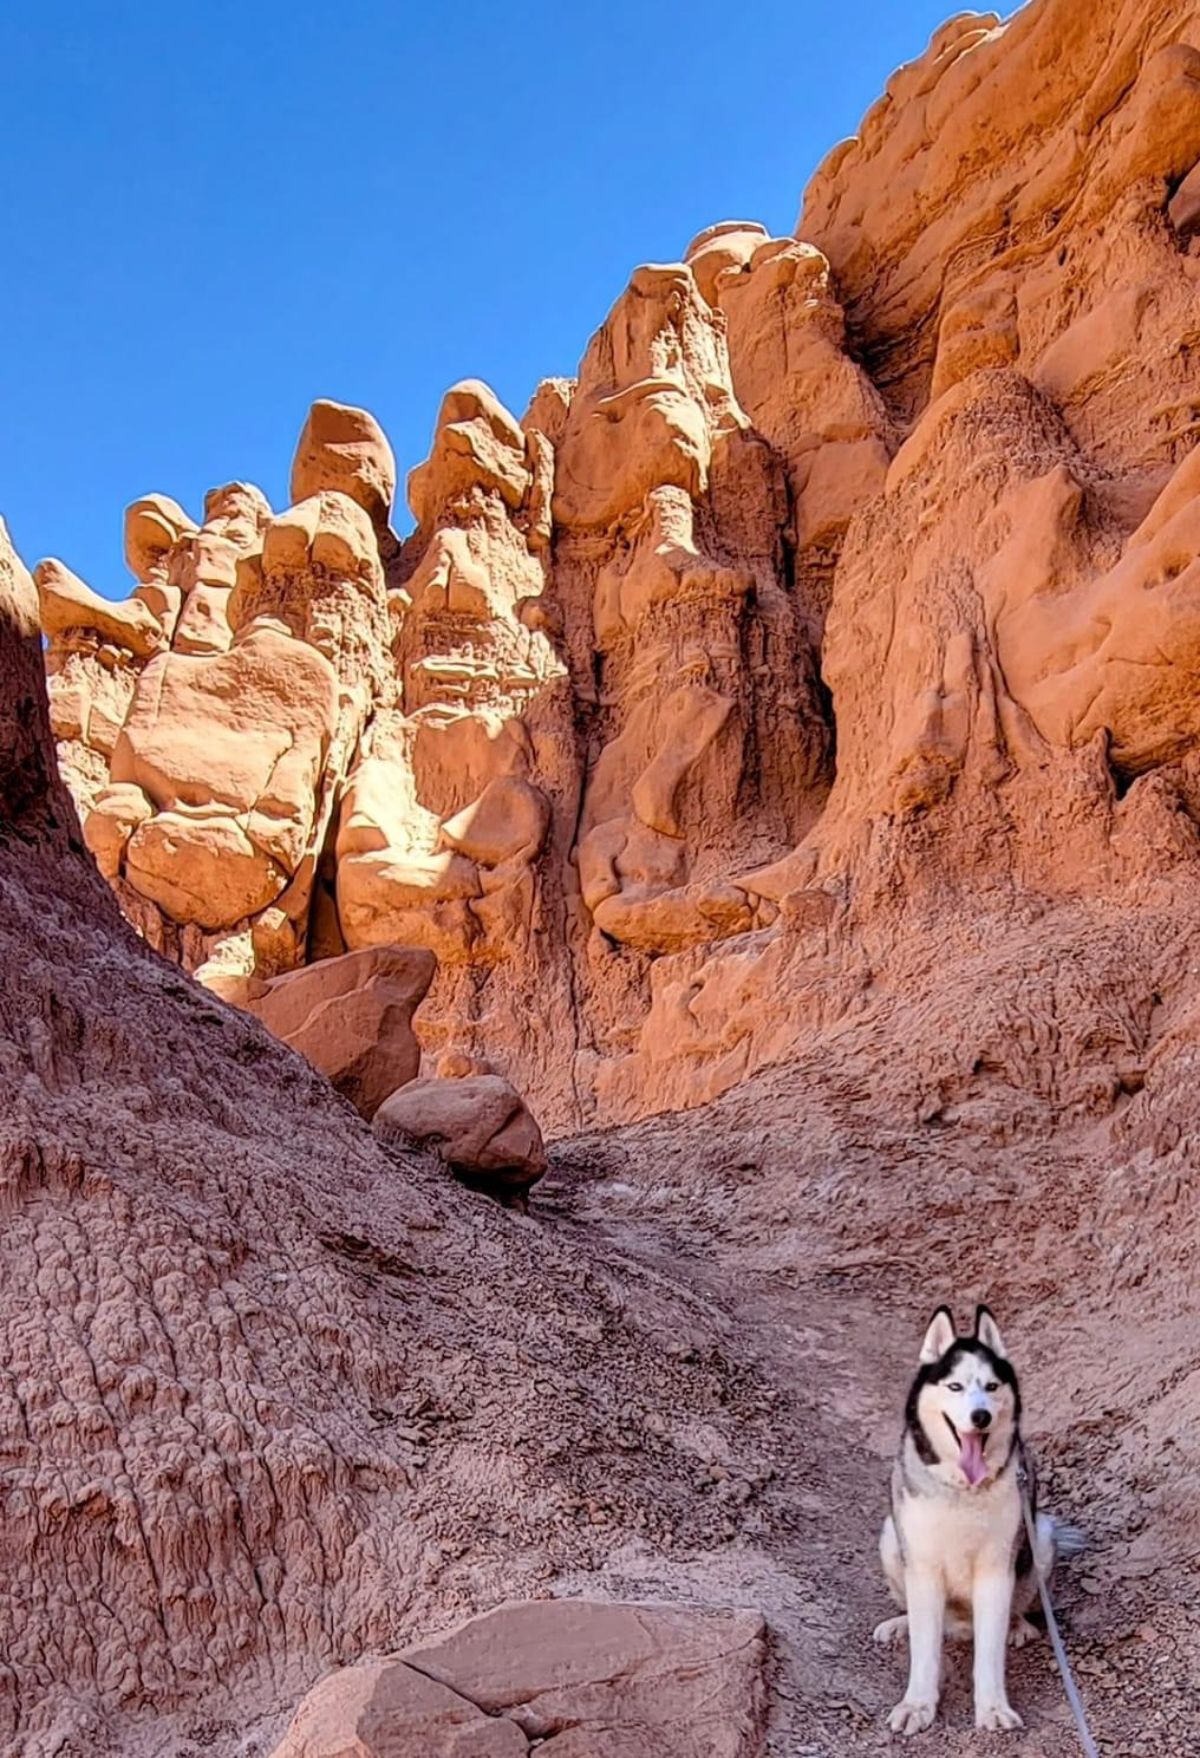 A husky dog standing on a trail in Utah National Parks.